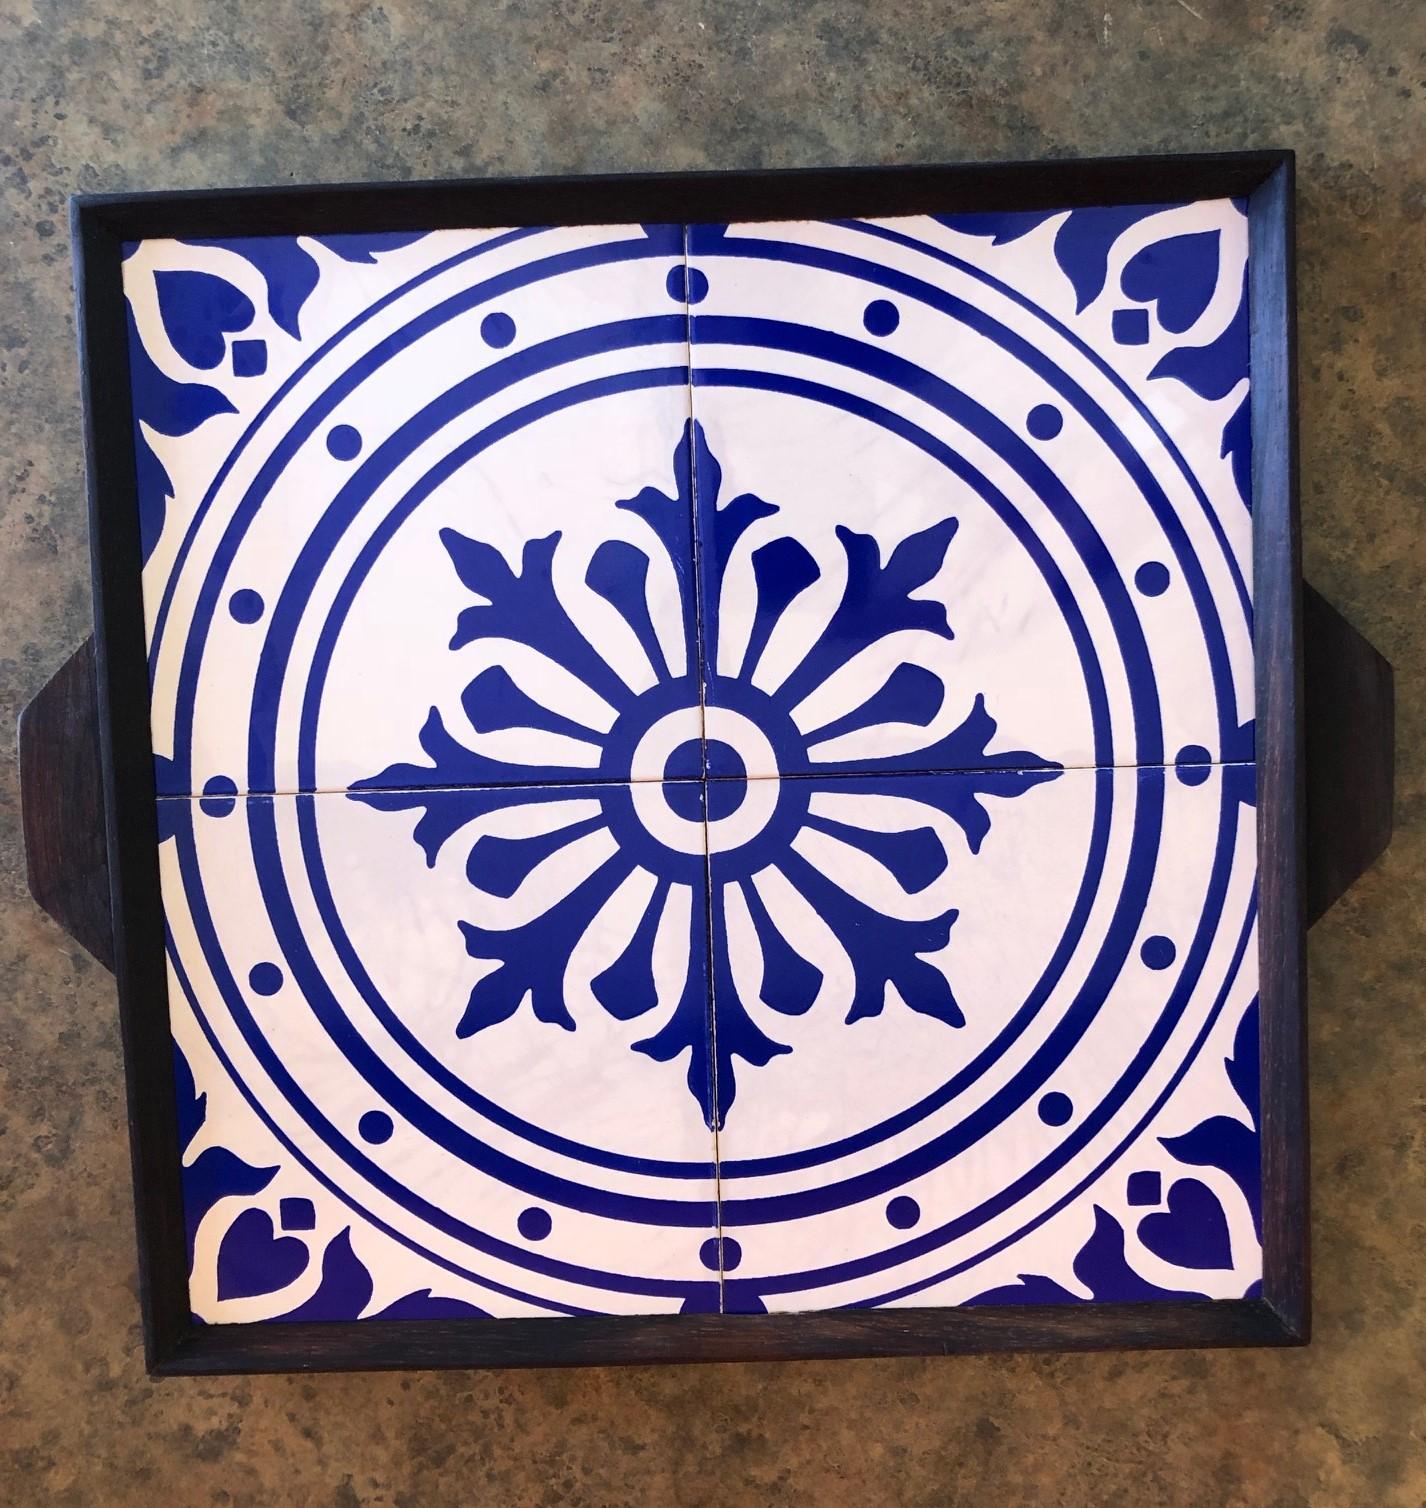 A very bright and colorful midcentury tray made of walnut and blue or white ceramic tiles believed to be from Scandinavia, circa 1960s. The measures 14.5